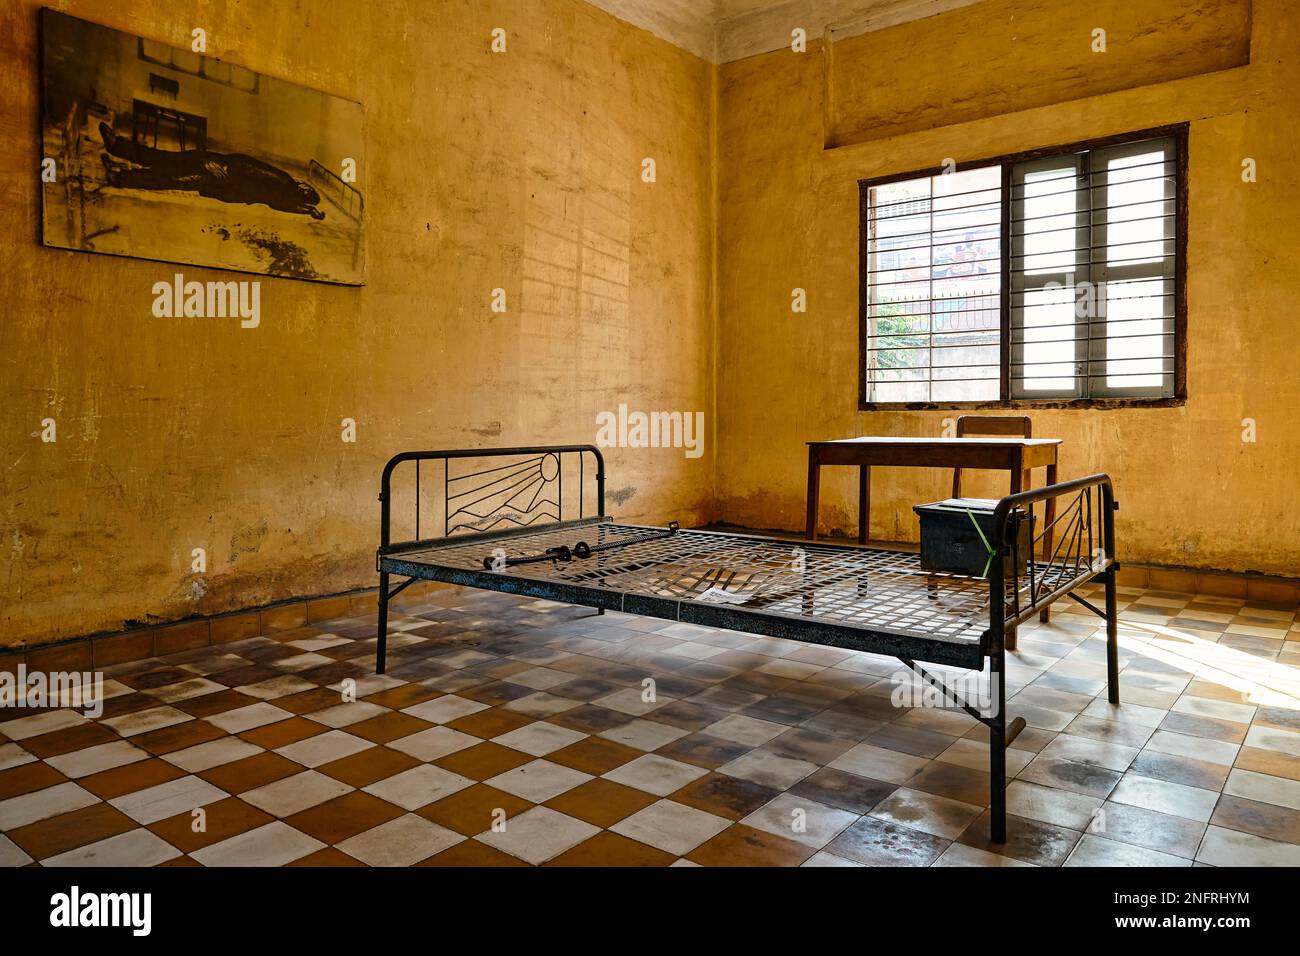 The torture chamber prison of S21 Tuol Sleng from the Khmer Rouge in Phnom Penh Cambodia Stock Photo